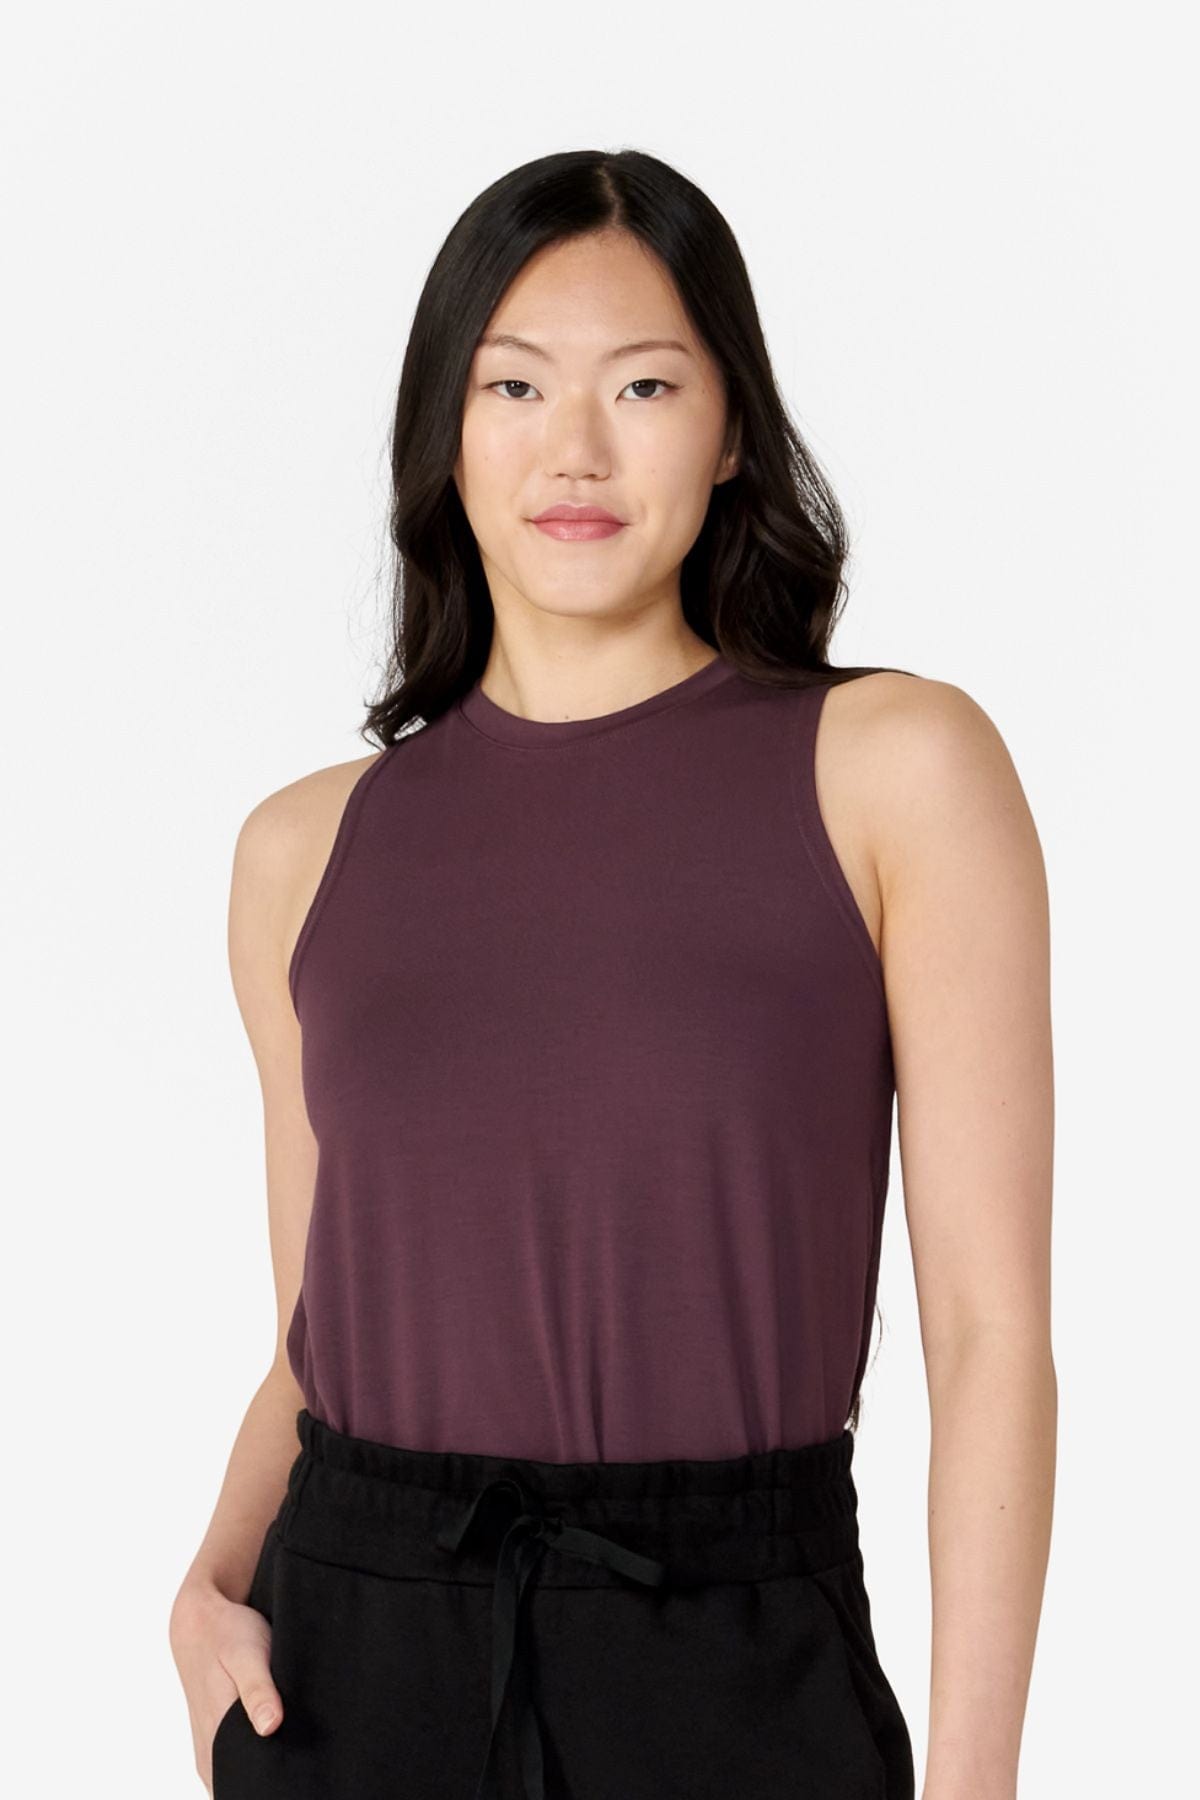 girl front view wearing a dark brown tank top